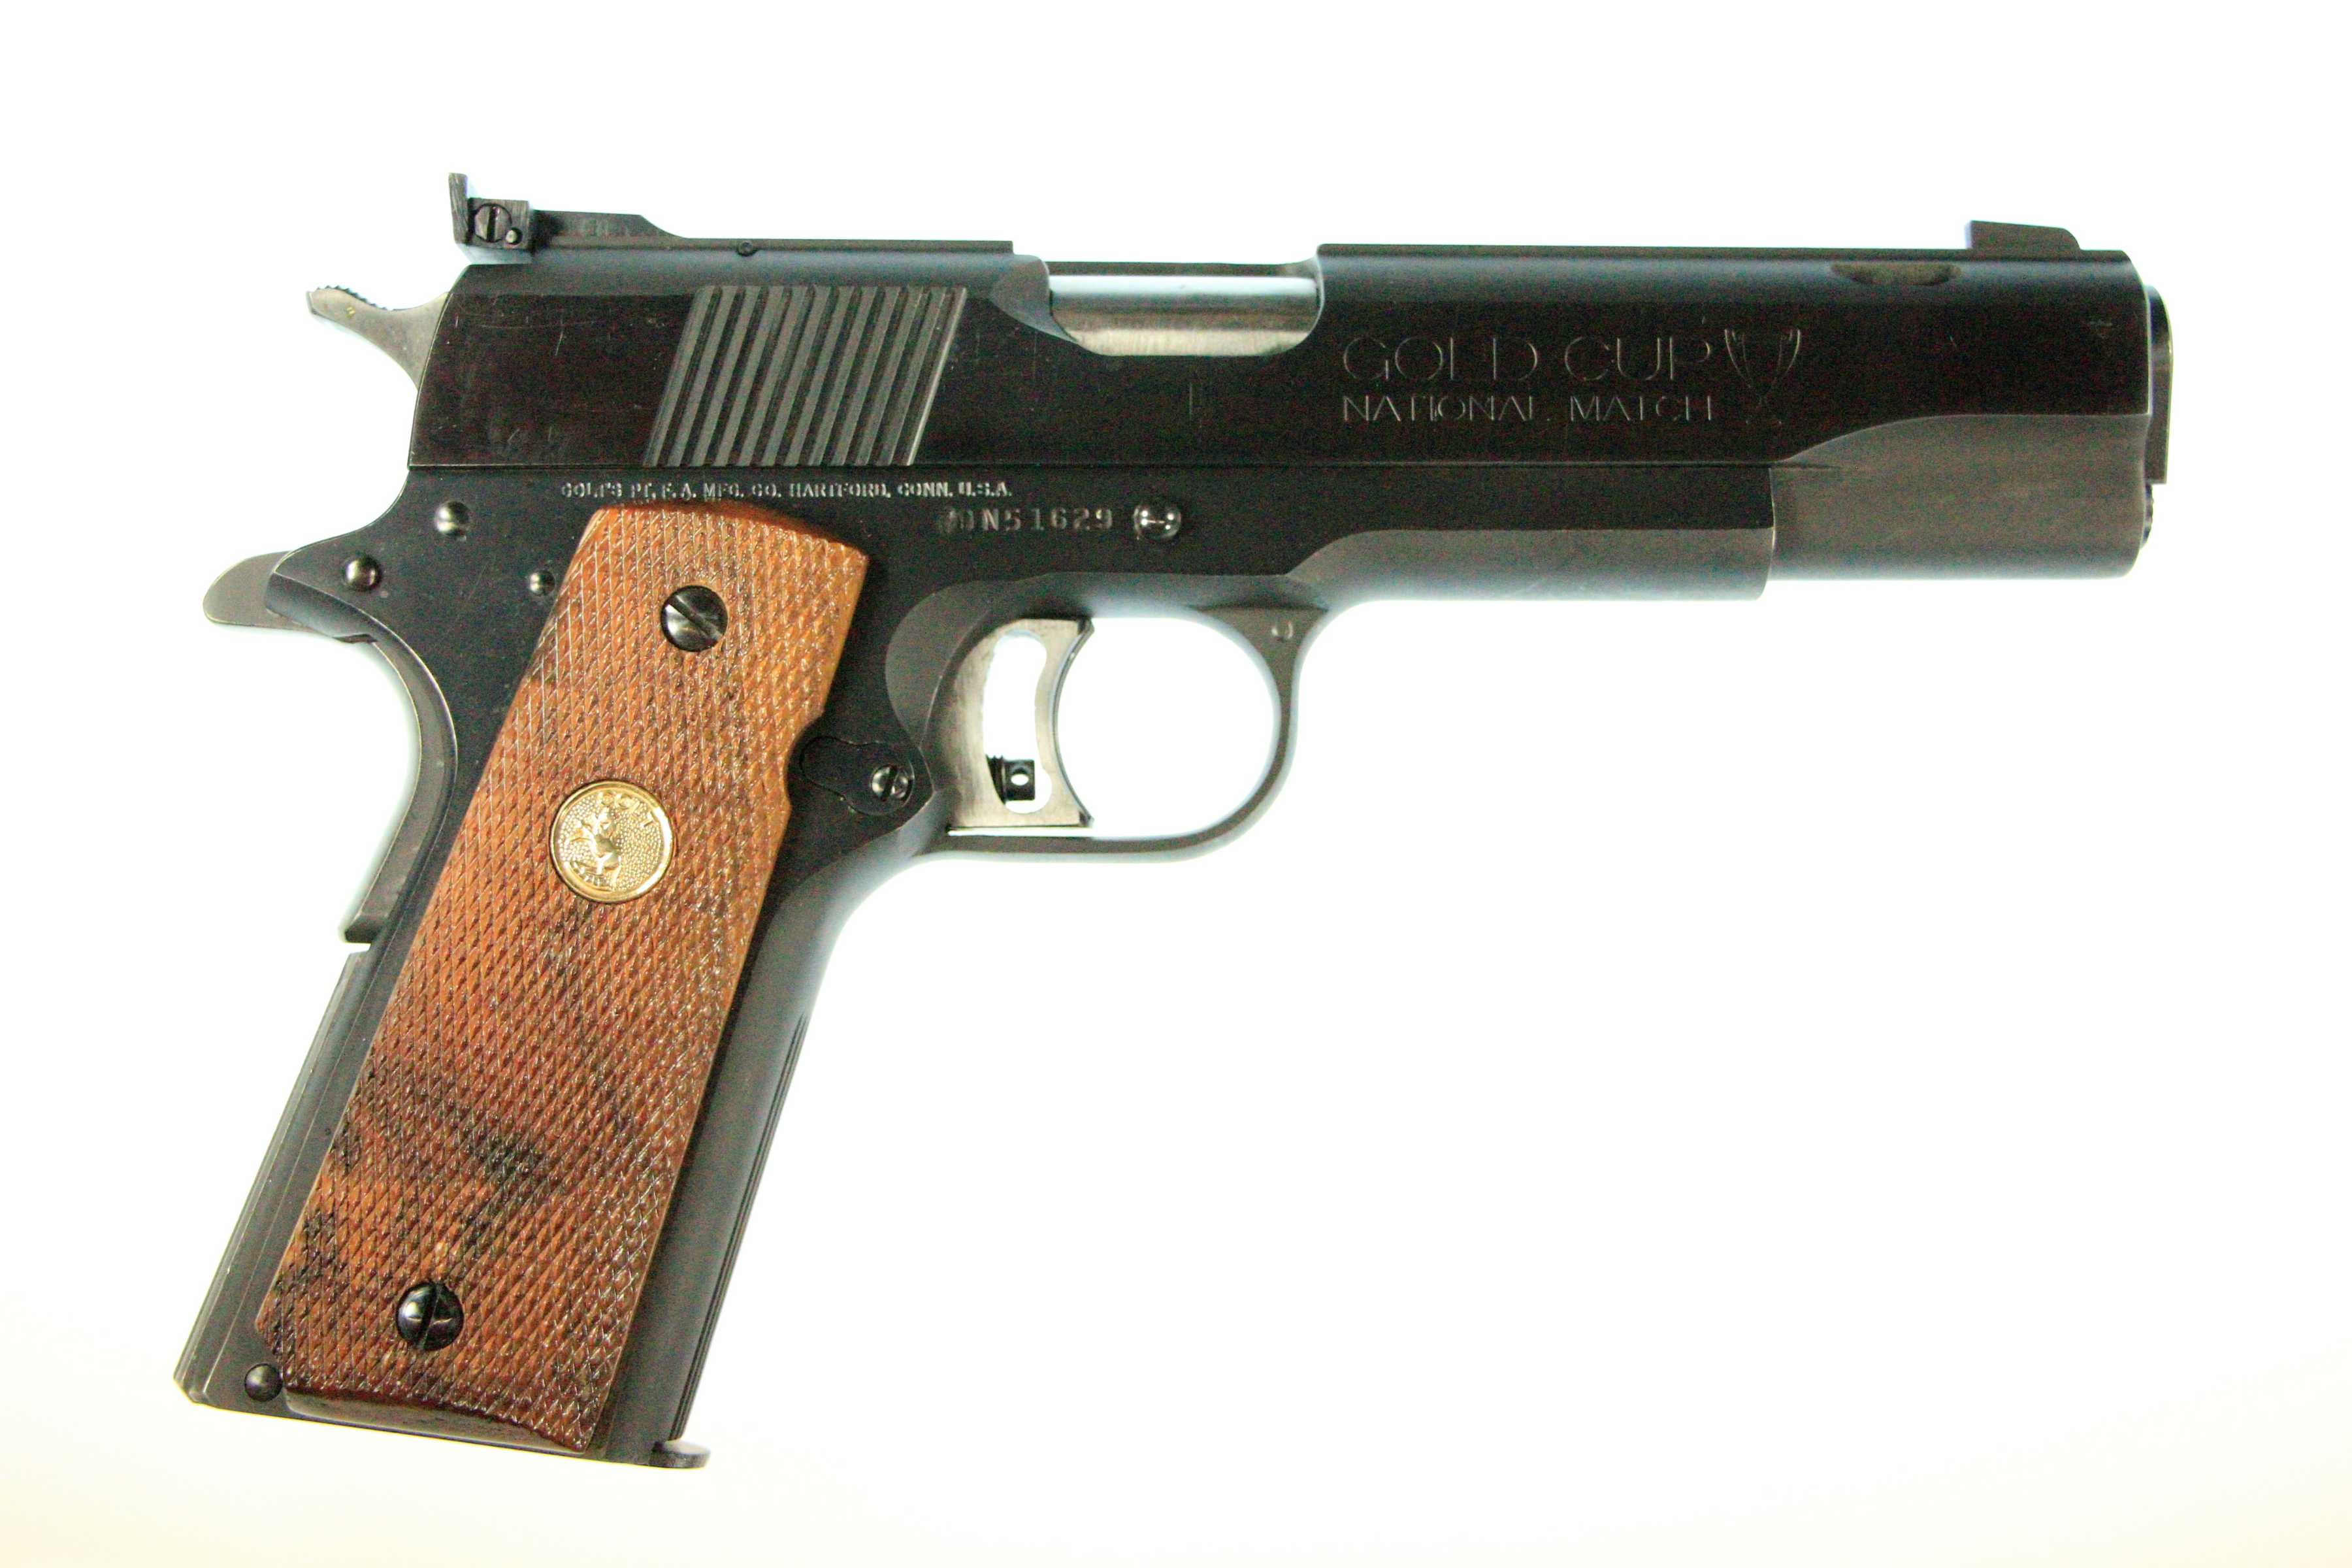 Colt Mark IV/ Series 70 Gold Cup National Match, 45 ACP